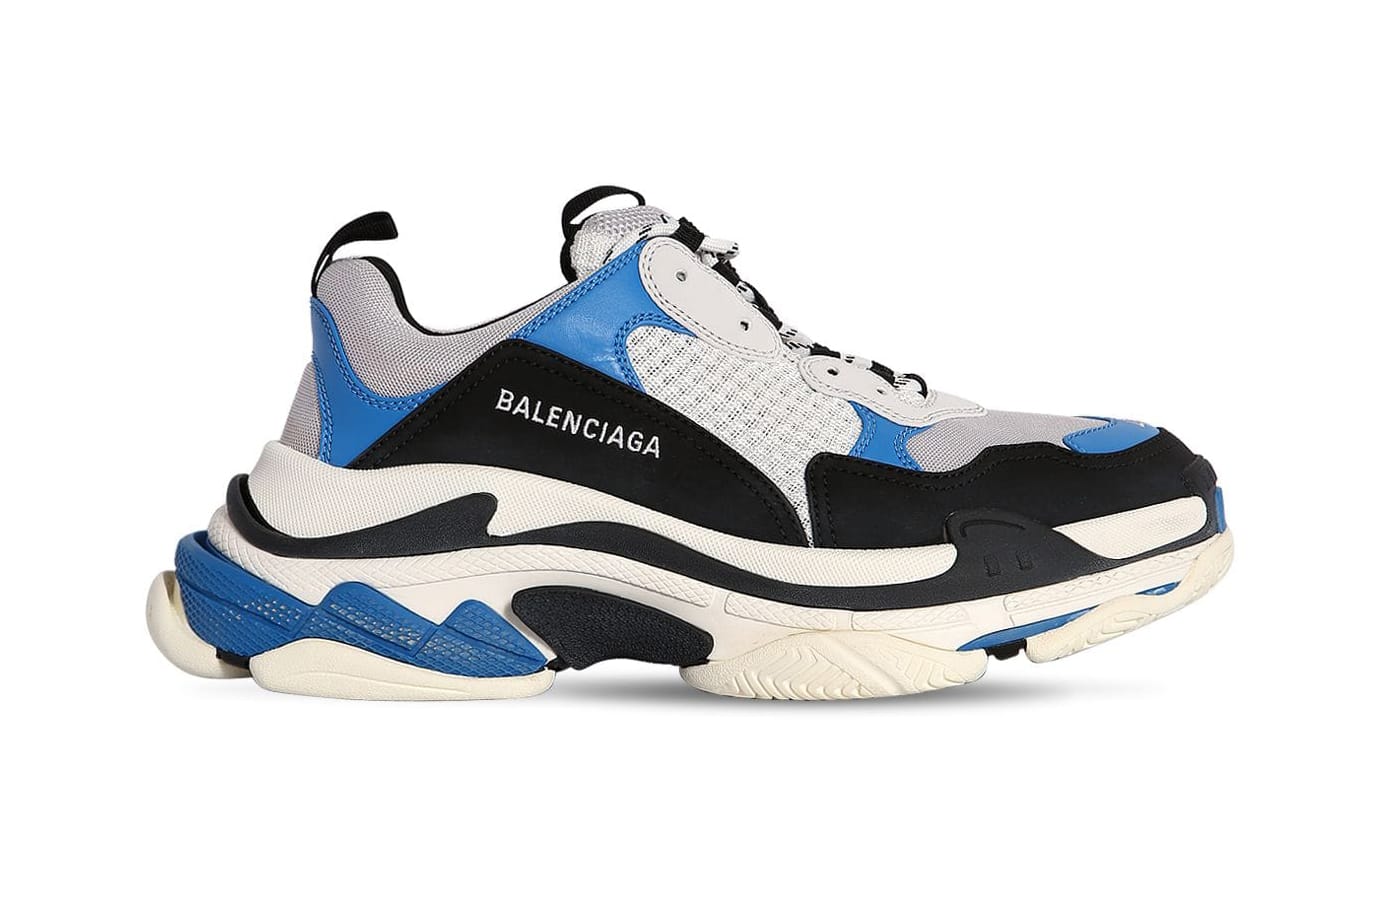 StockX This Balenciaga Triple S collab is selling Facebook